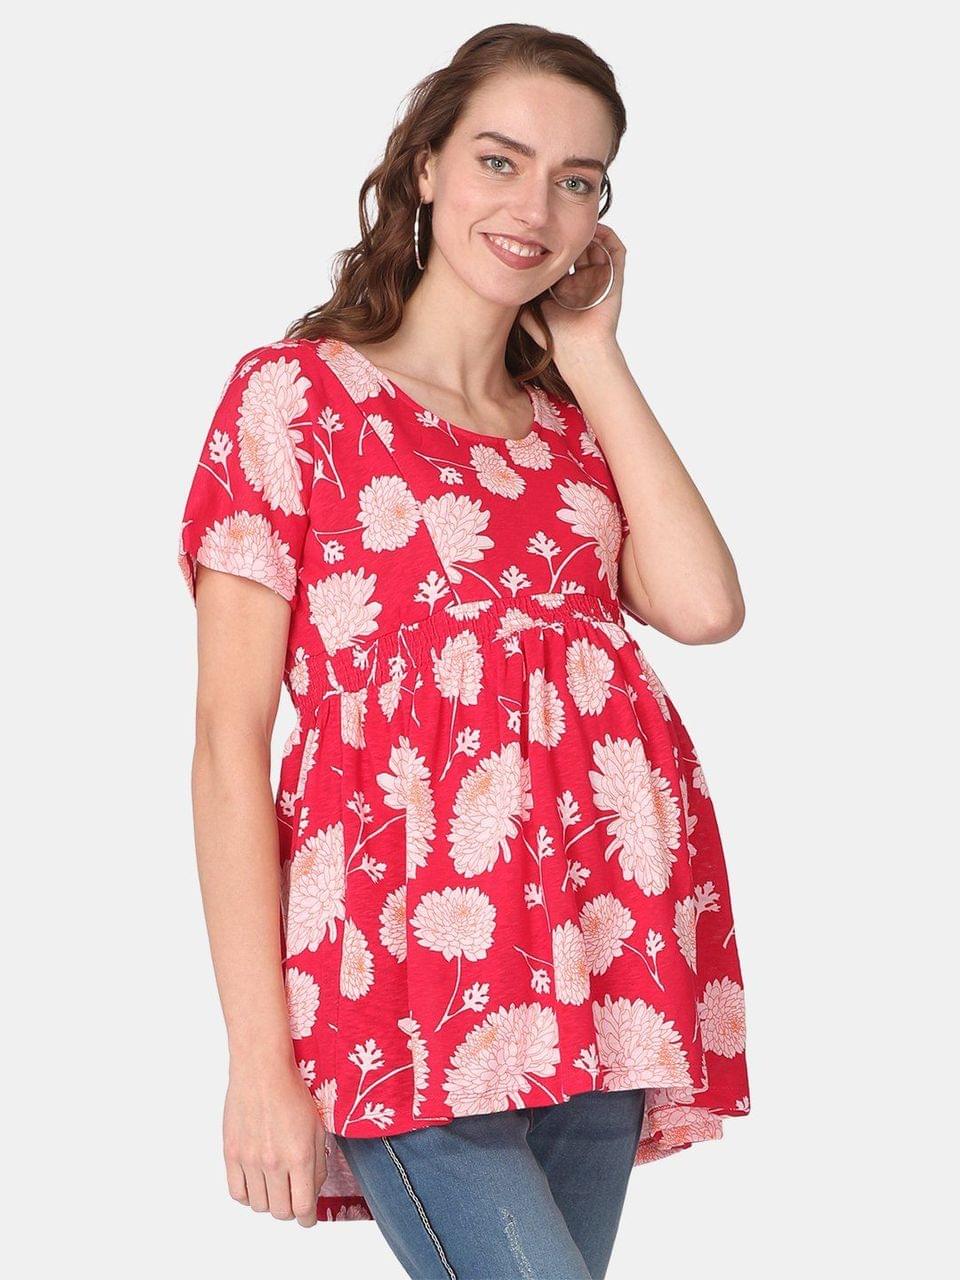 The Mom Store Scarlet Bloom Maternity and Nursing Top